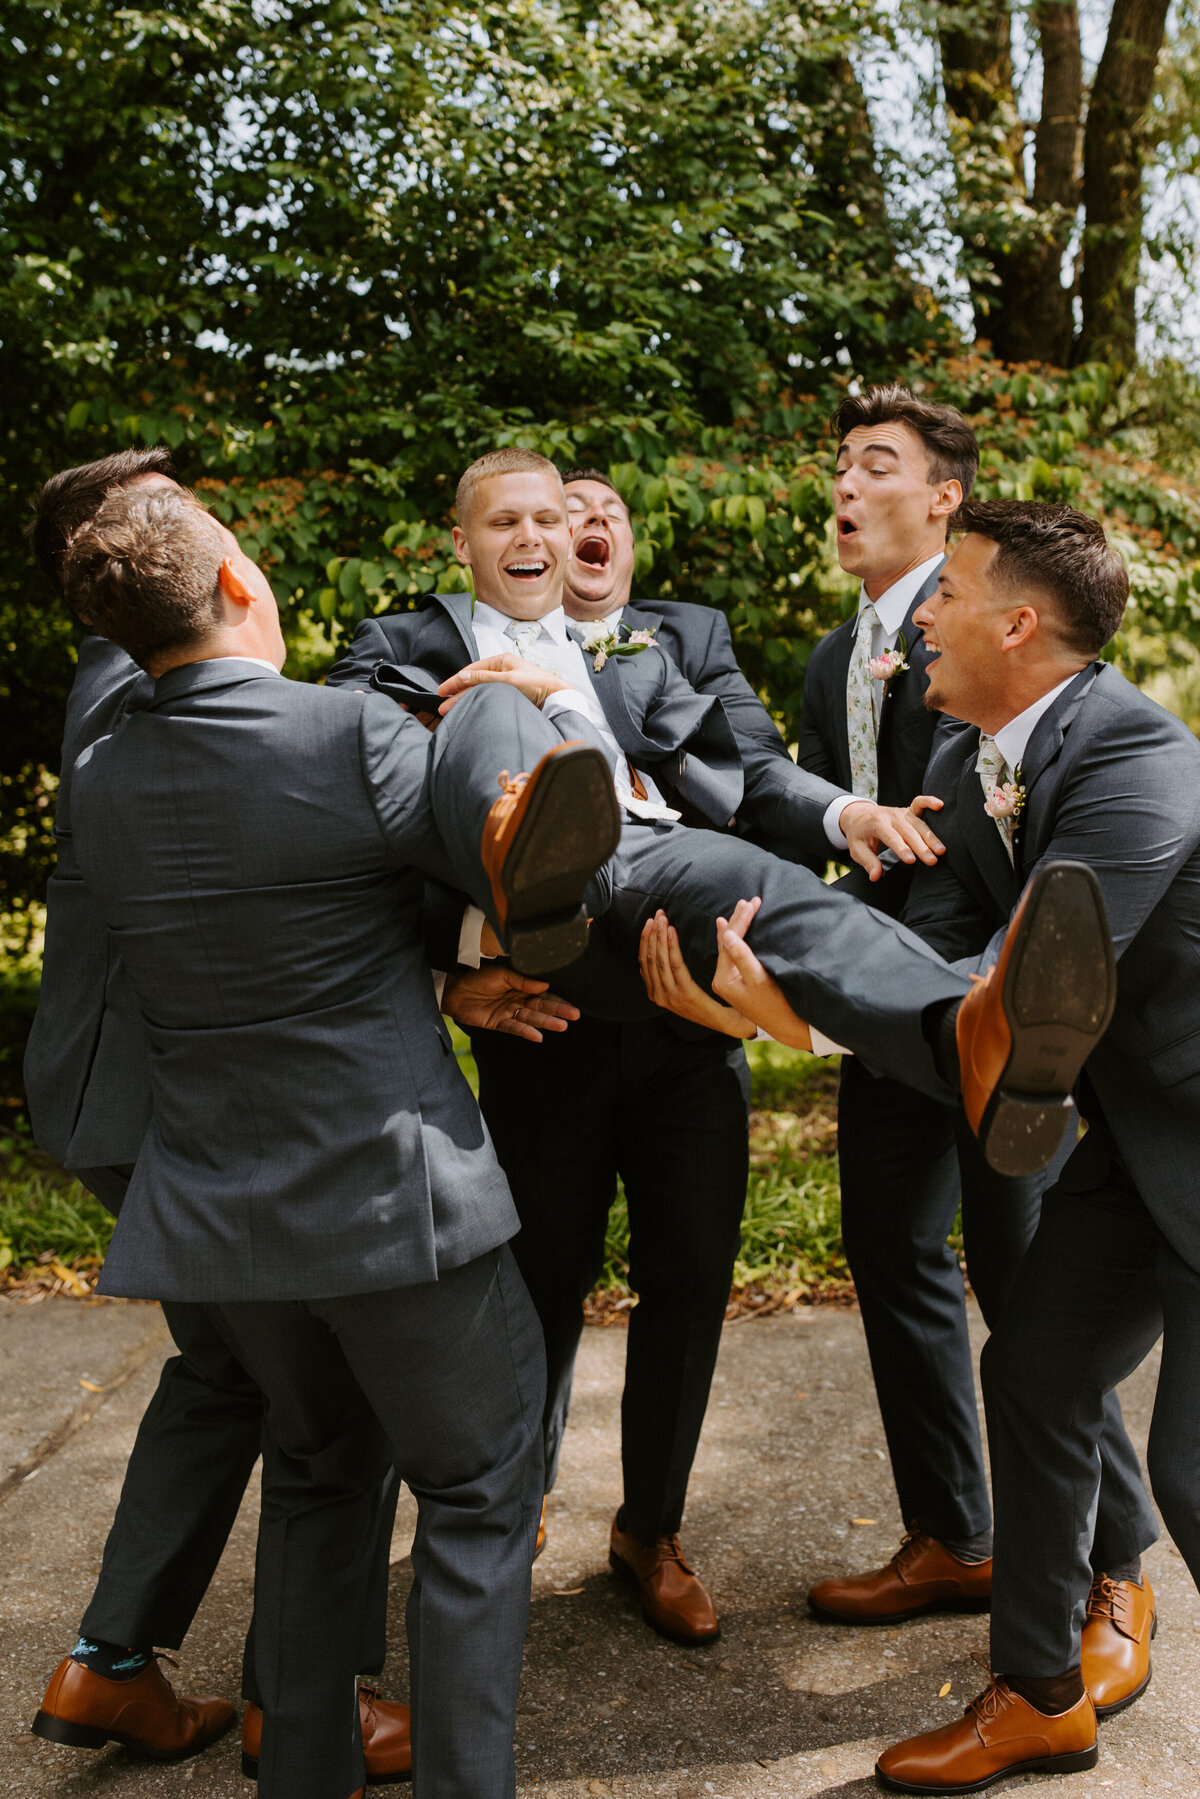 groomsmen smiling and holding up the groom together